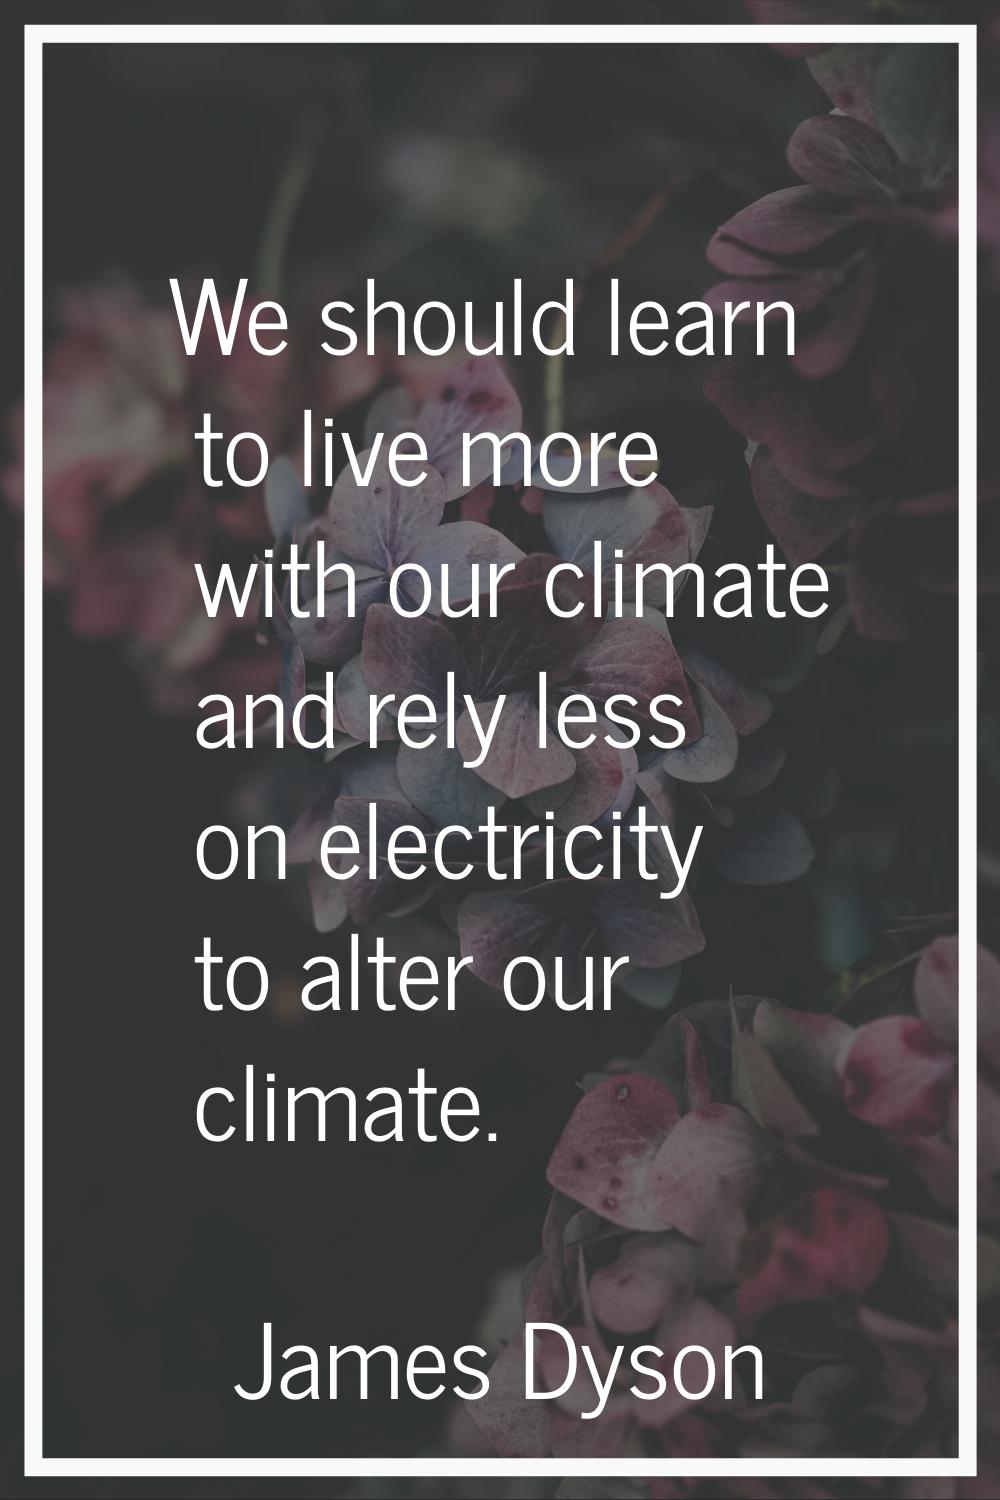 We should learn to live more with our climate and rely less on electricity to alter our climate.